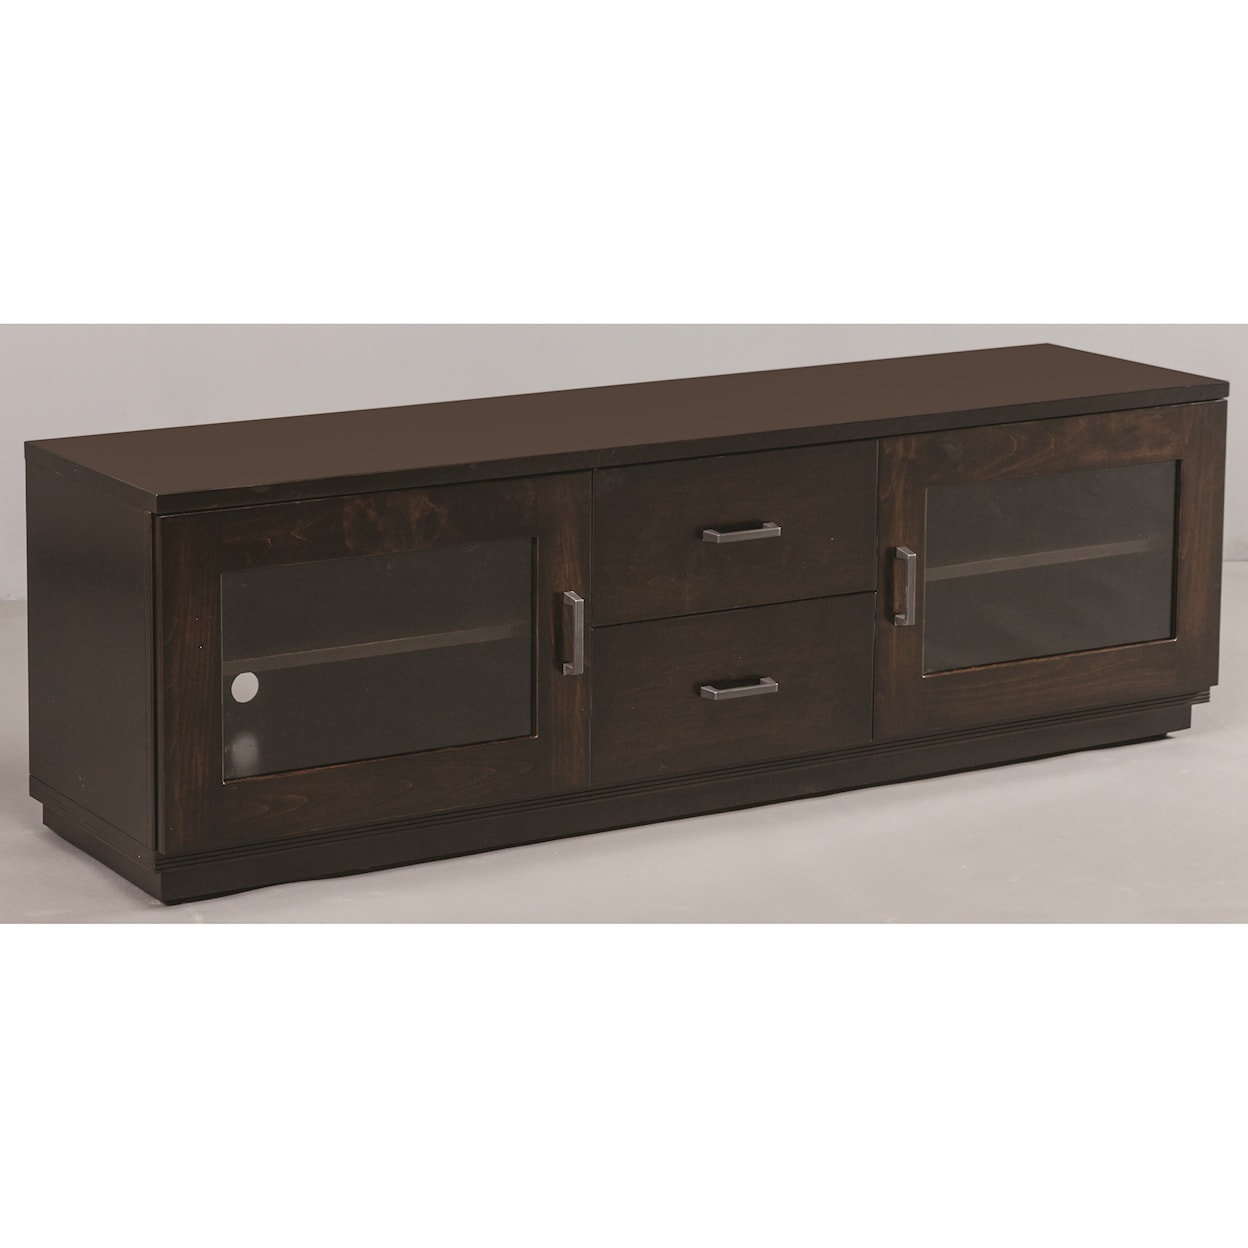 INTEG Wood Products Entertainment Venice TV Stand